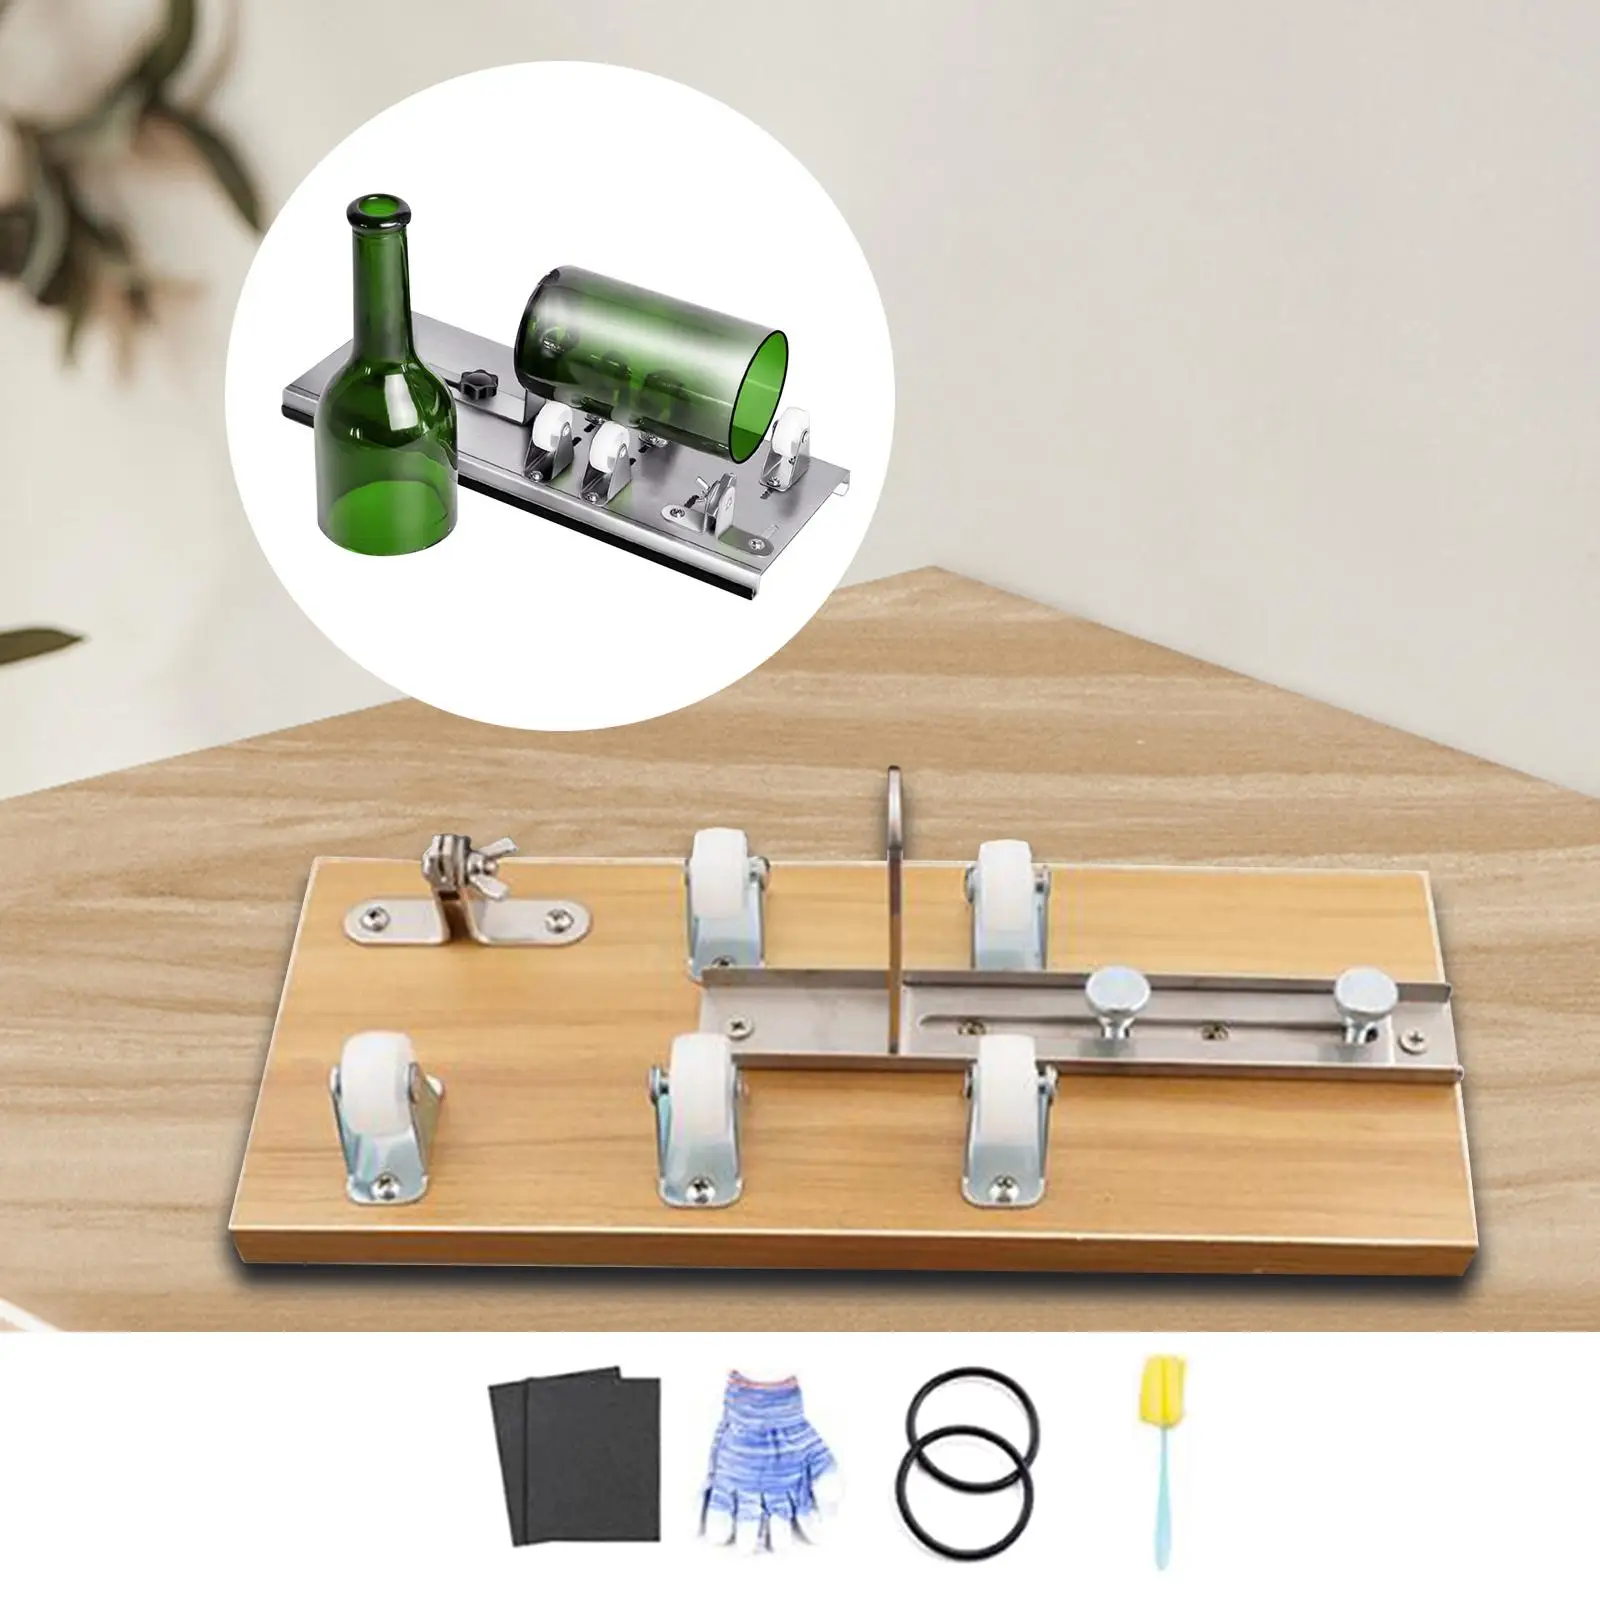 Glass Bottle Cutter Manual Tool Stainless Steel Household Stable Handicrafts for